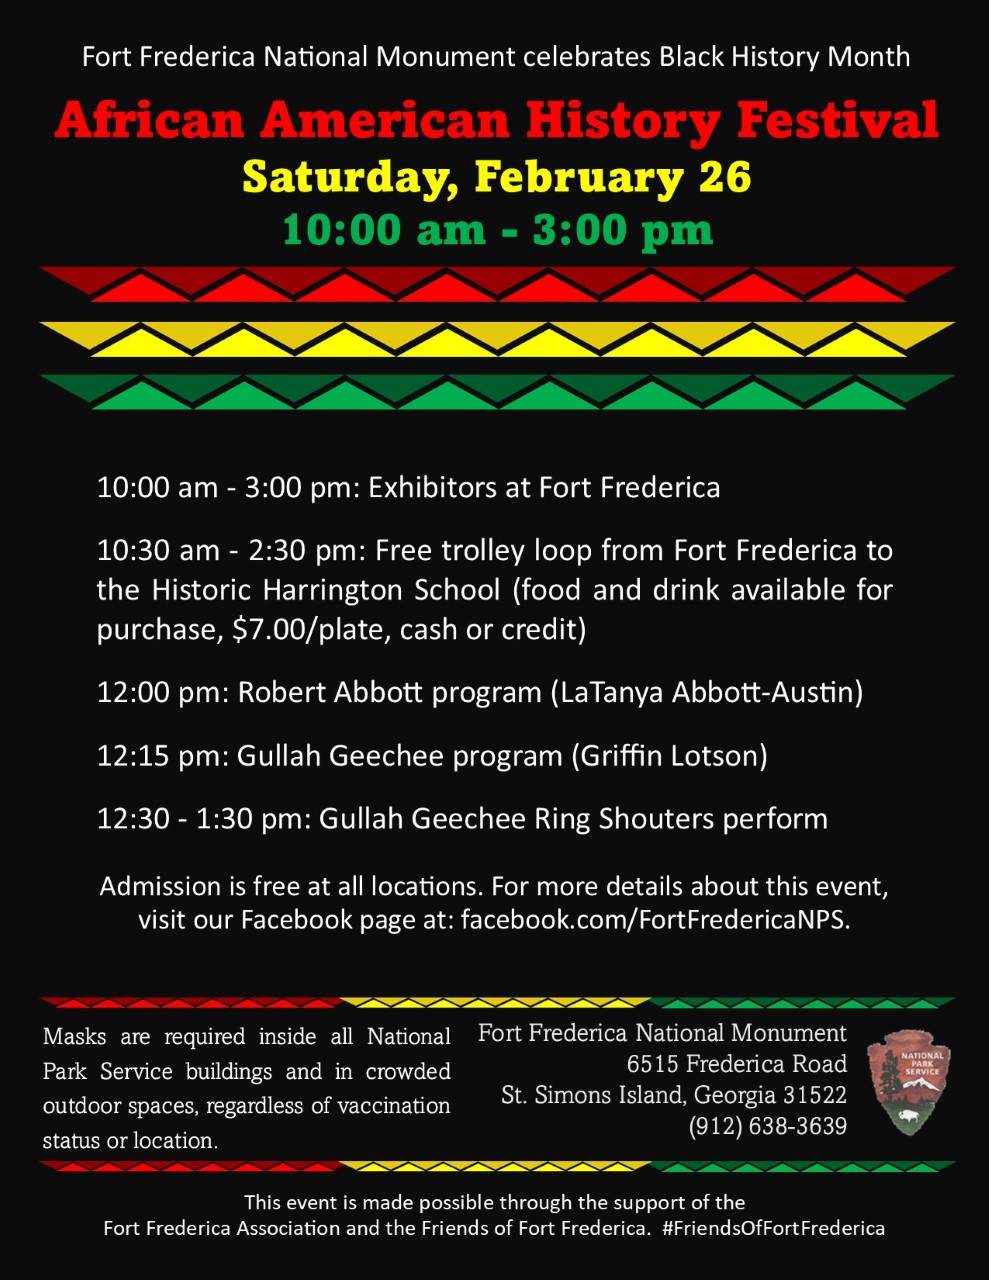 African American History Festival at Fort Frederica National Monument